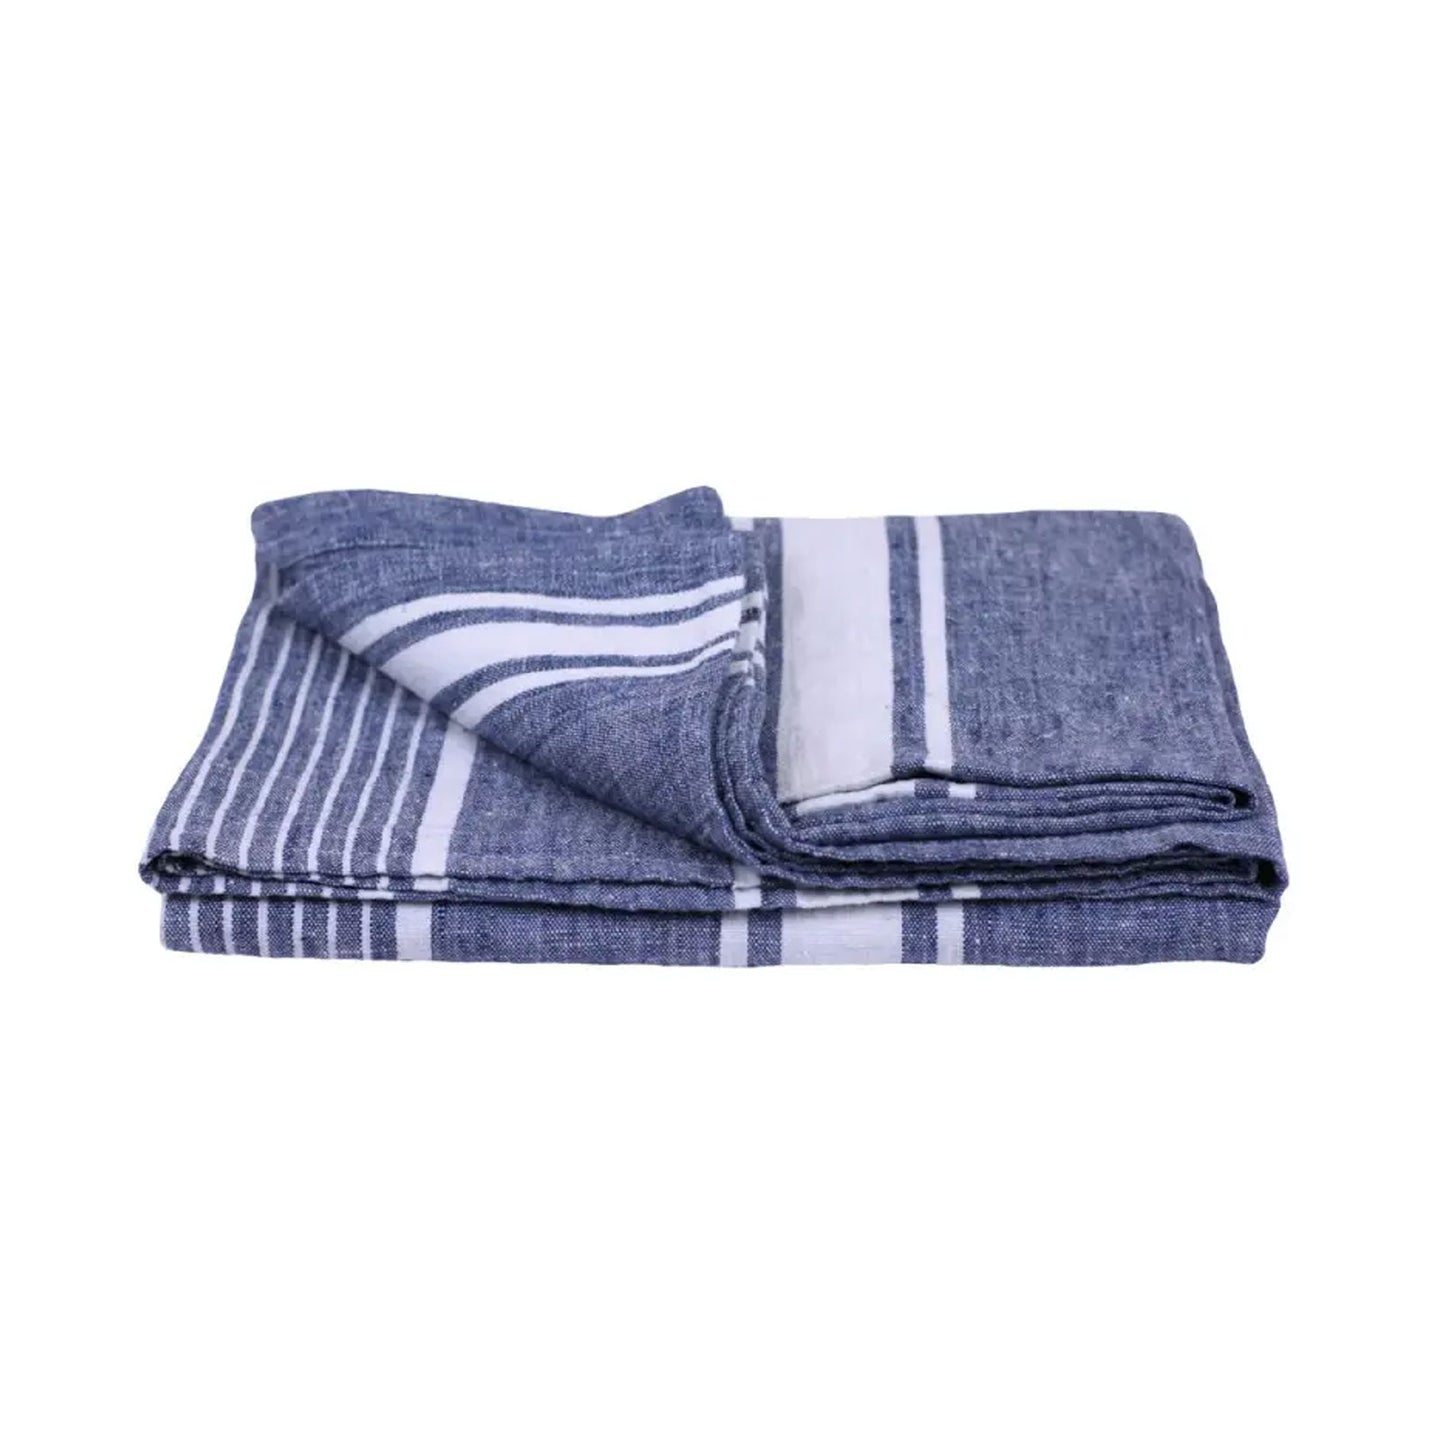 Stonewashed Linen Beach Towel, Blue with White Stripes